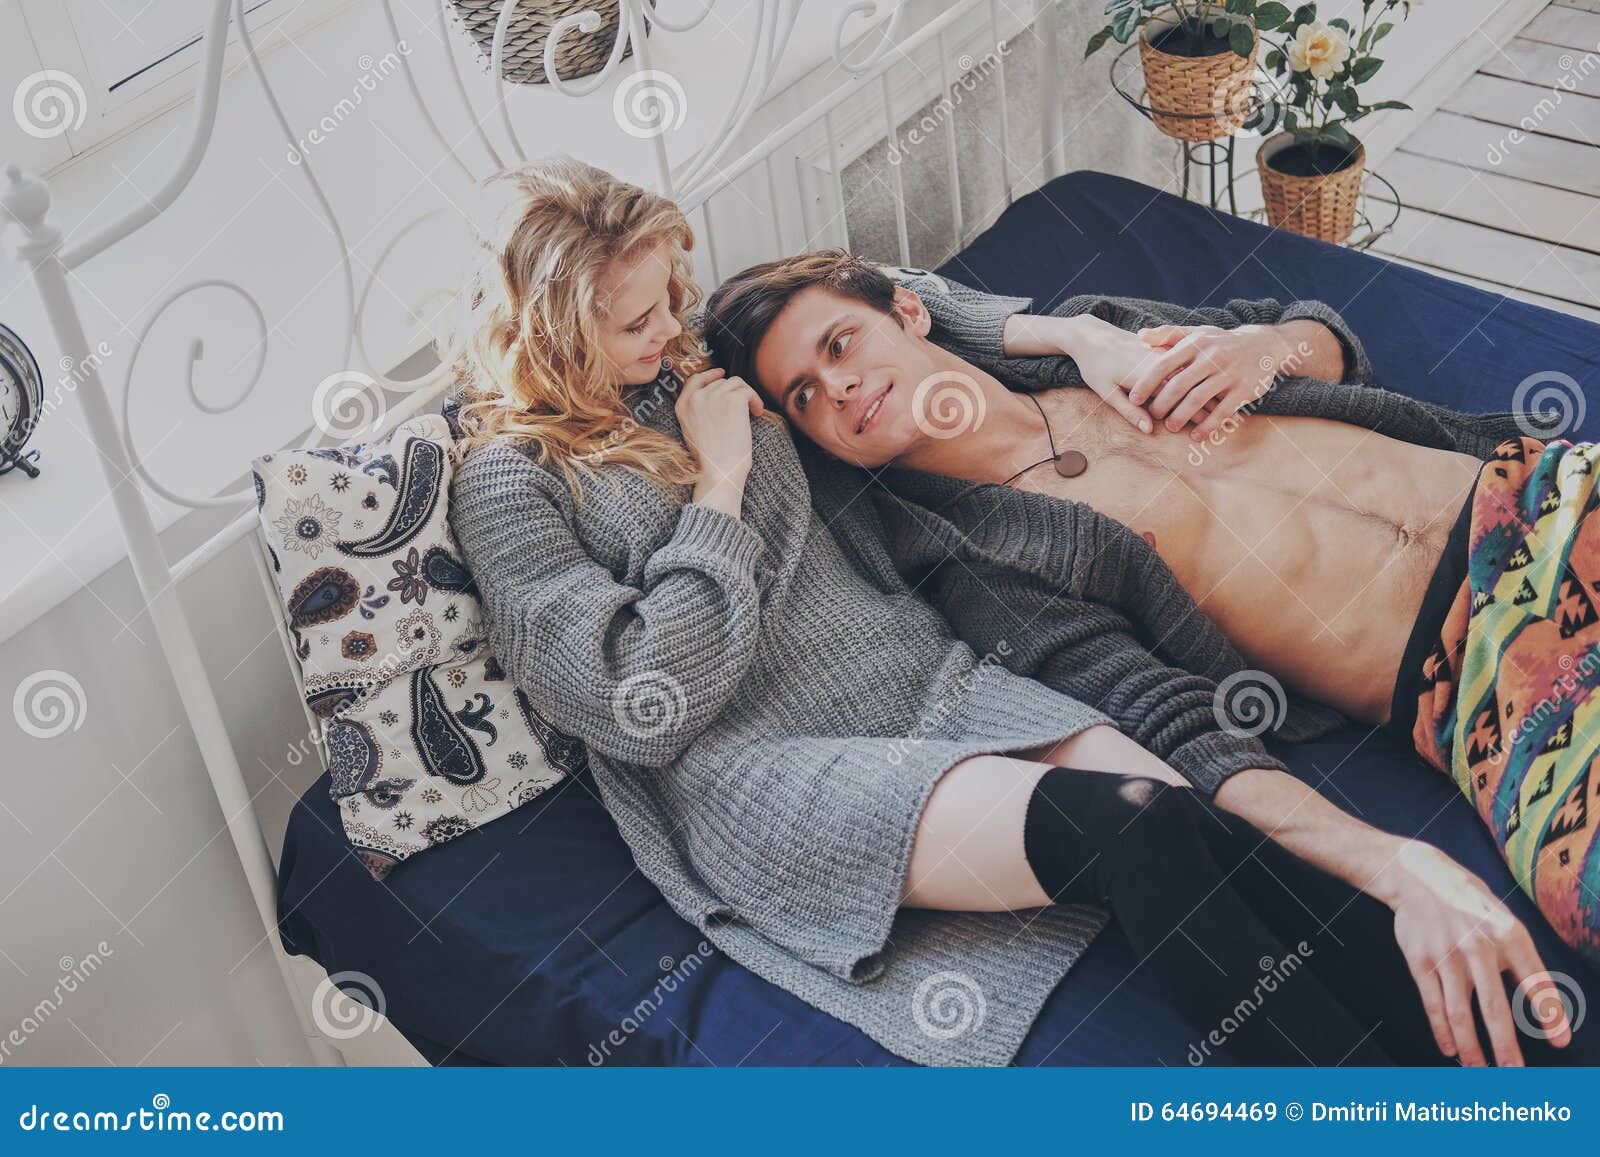 aileen sanvictores recommends Picture Of Man And Woman Cuddling In Bed